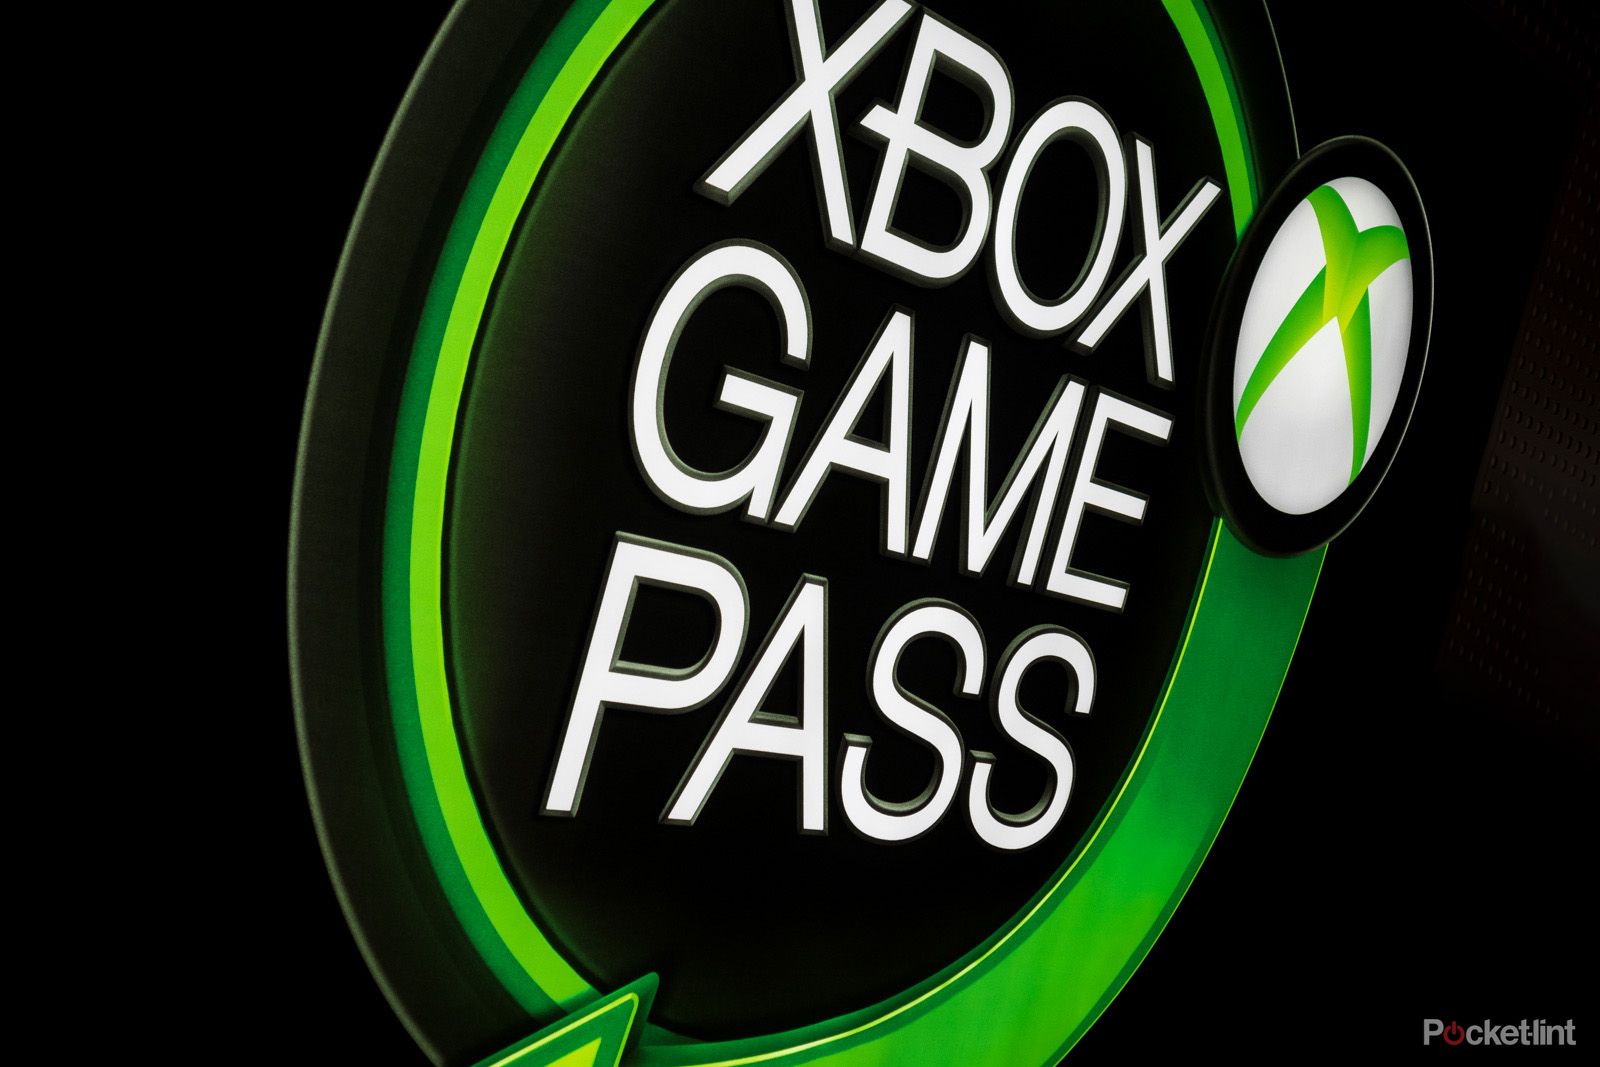 BT offers Xbox Game Pass Ultimate for £10 a month to broadband customers photo 1